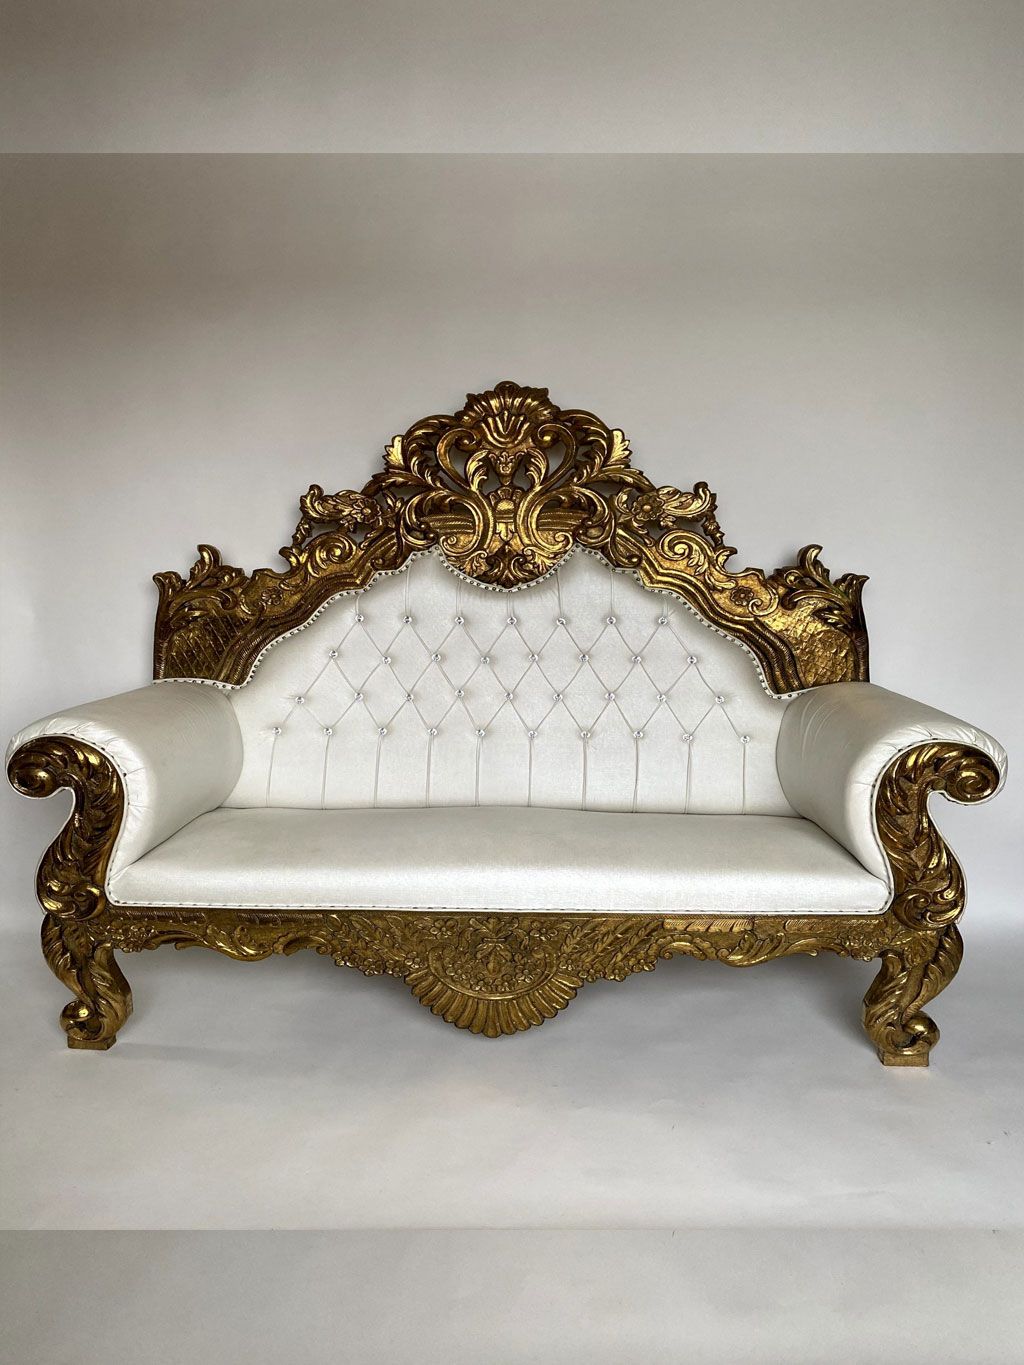 Royal Gold on White Engraved & Tufted